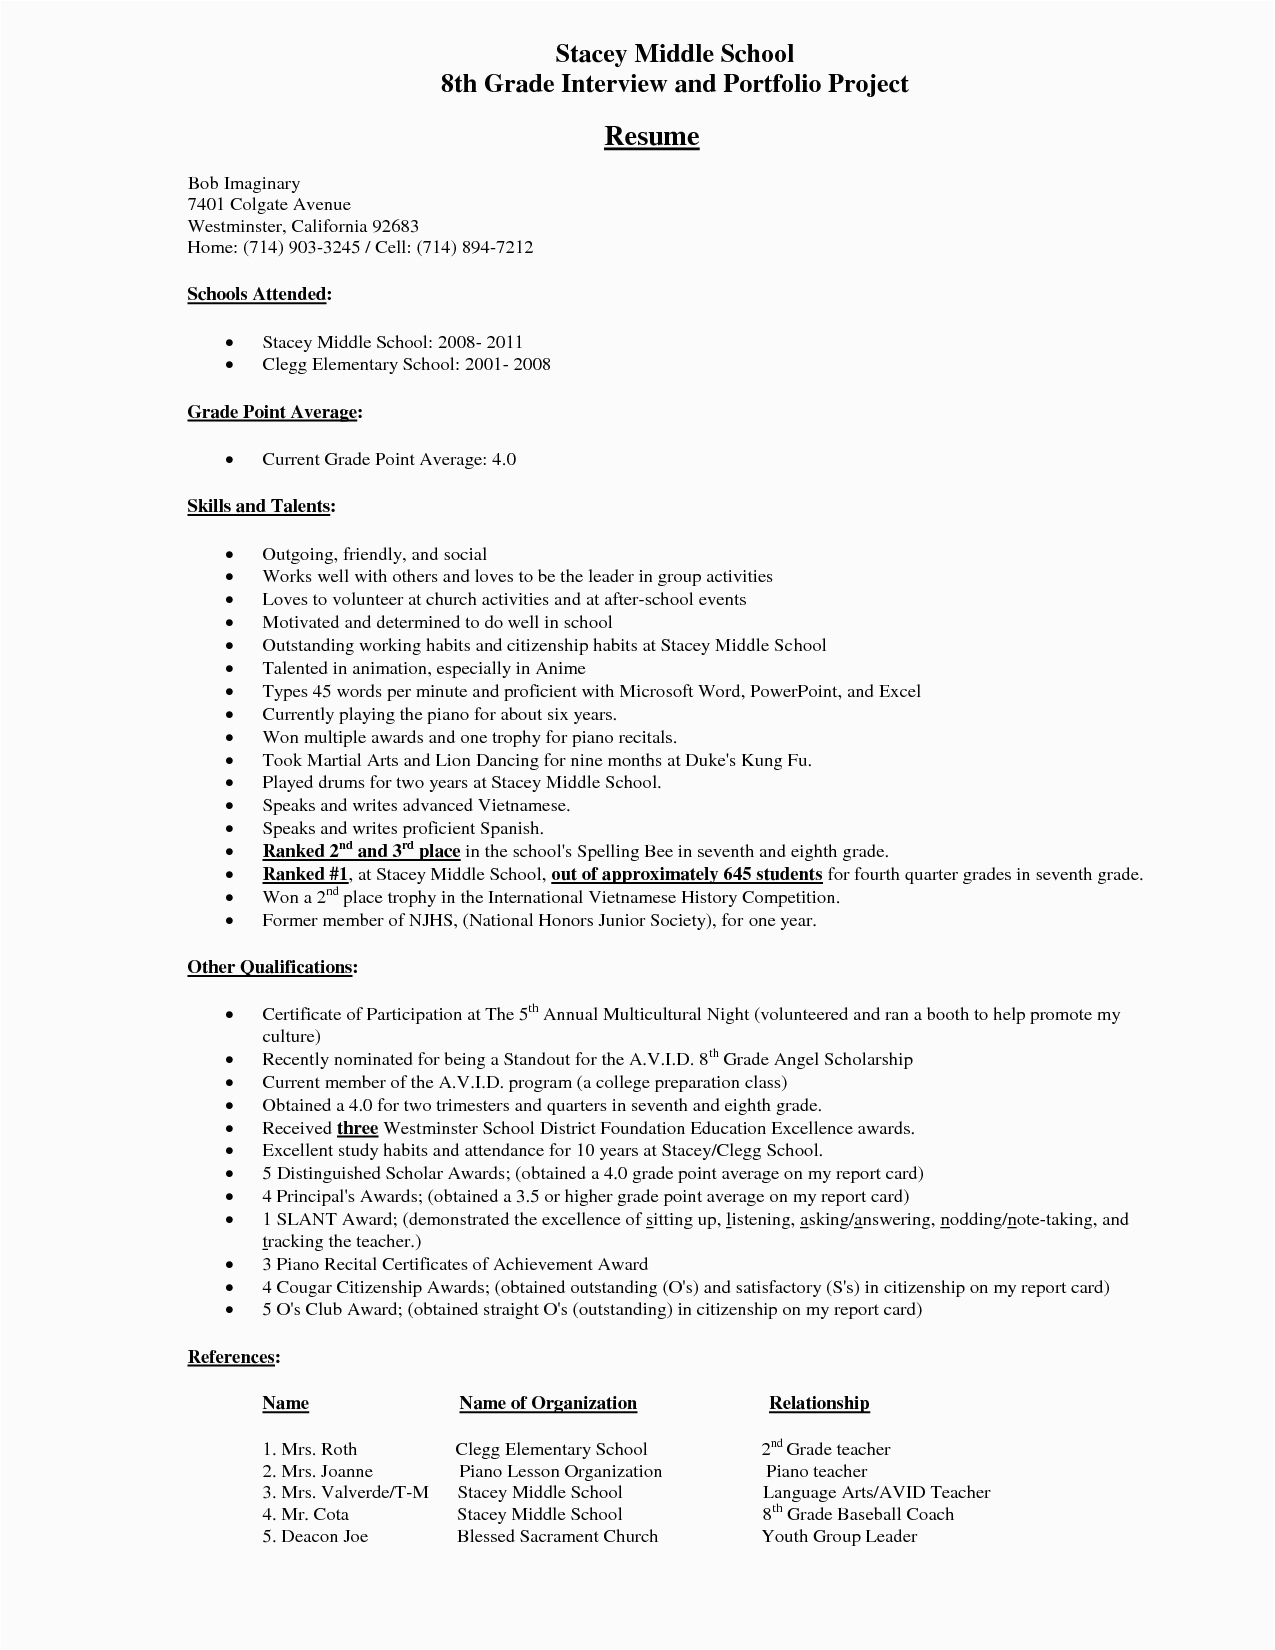 Resume Template for Middle School Students Middle School Student Resume Example